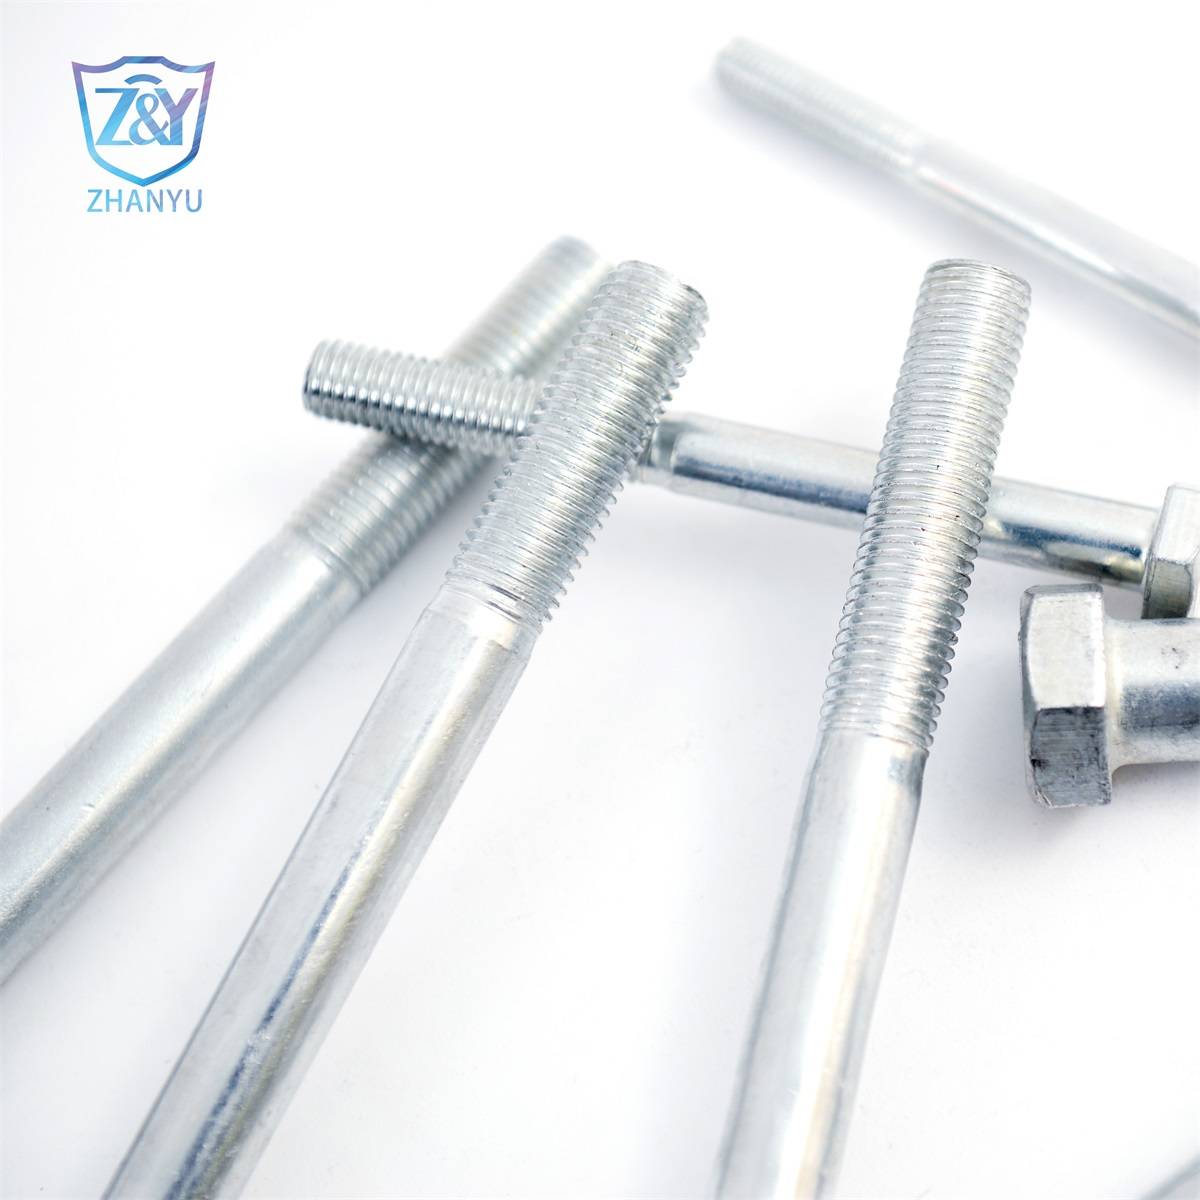 China Wholesale Fasten Nuts And Bolts Pricelist –  Carbon steel hexagon bolt – Zhanyu